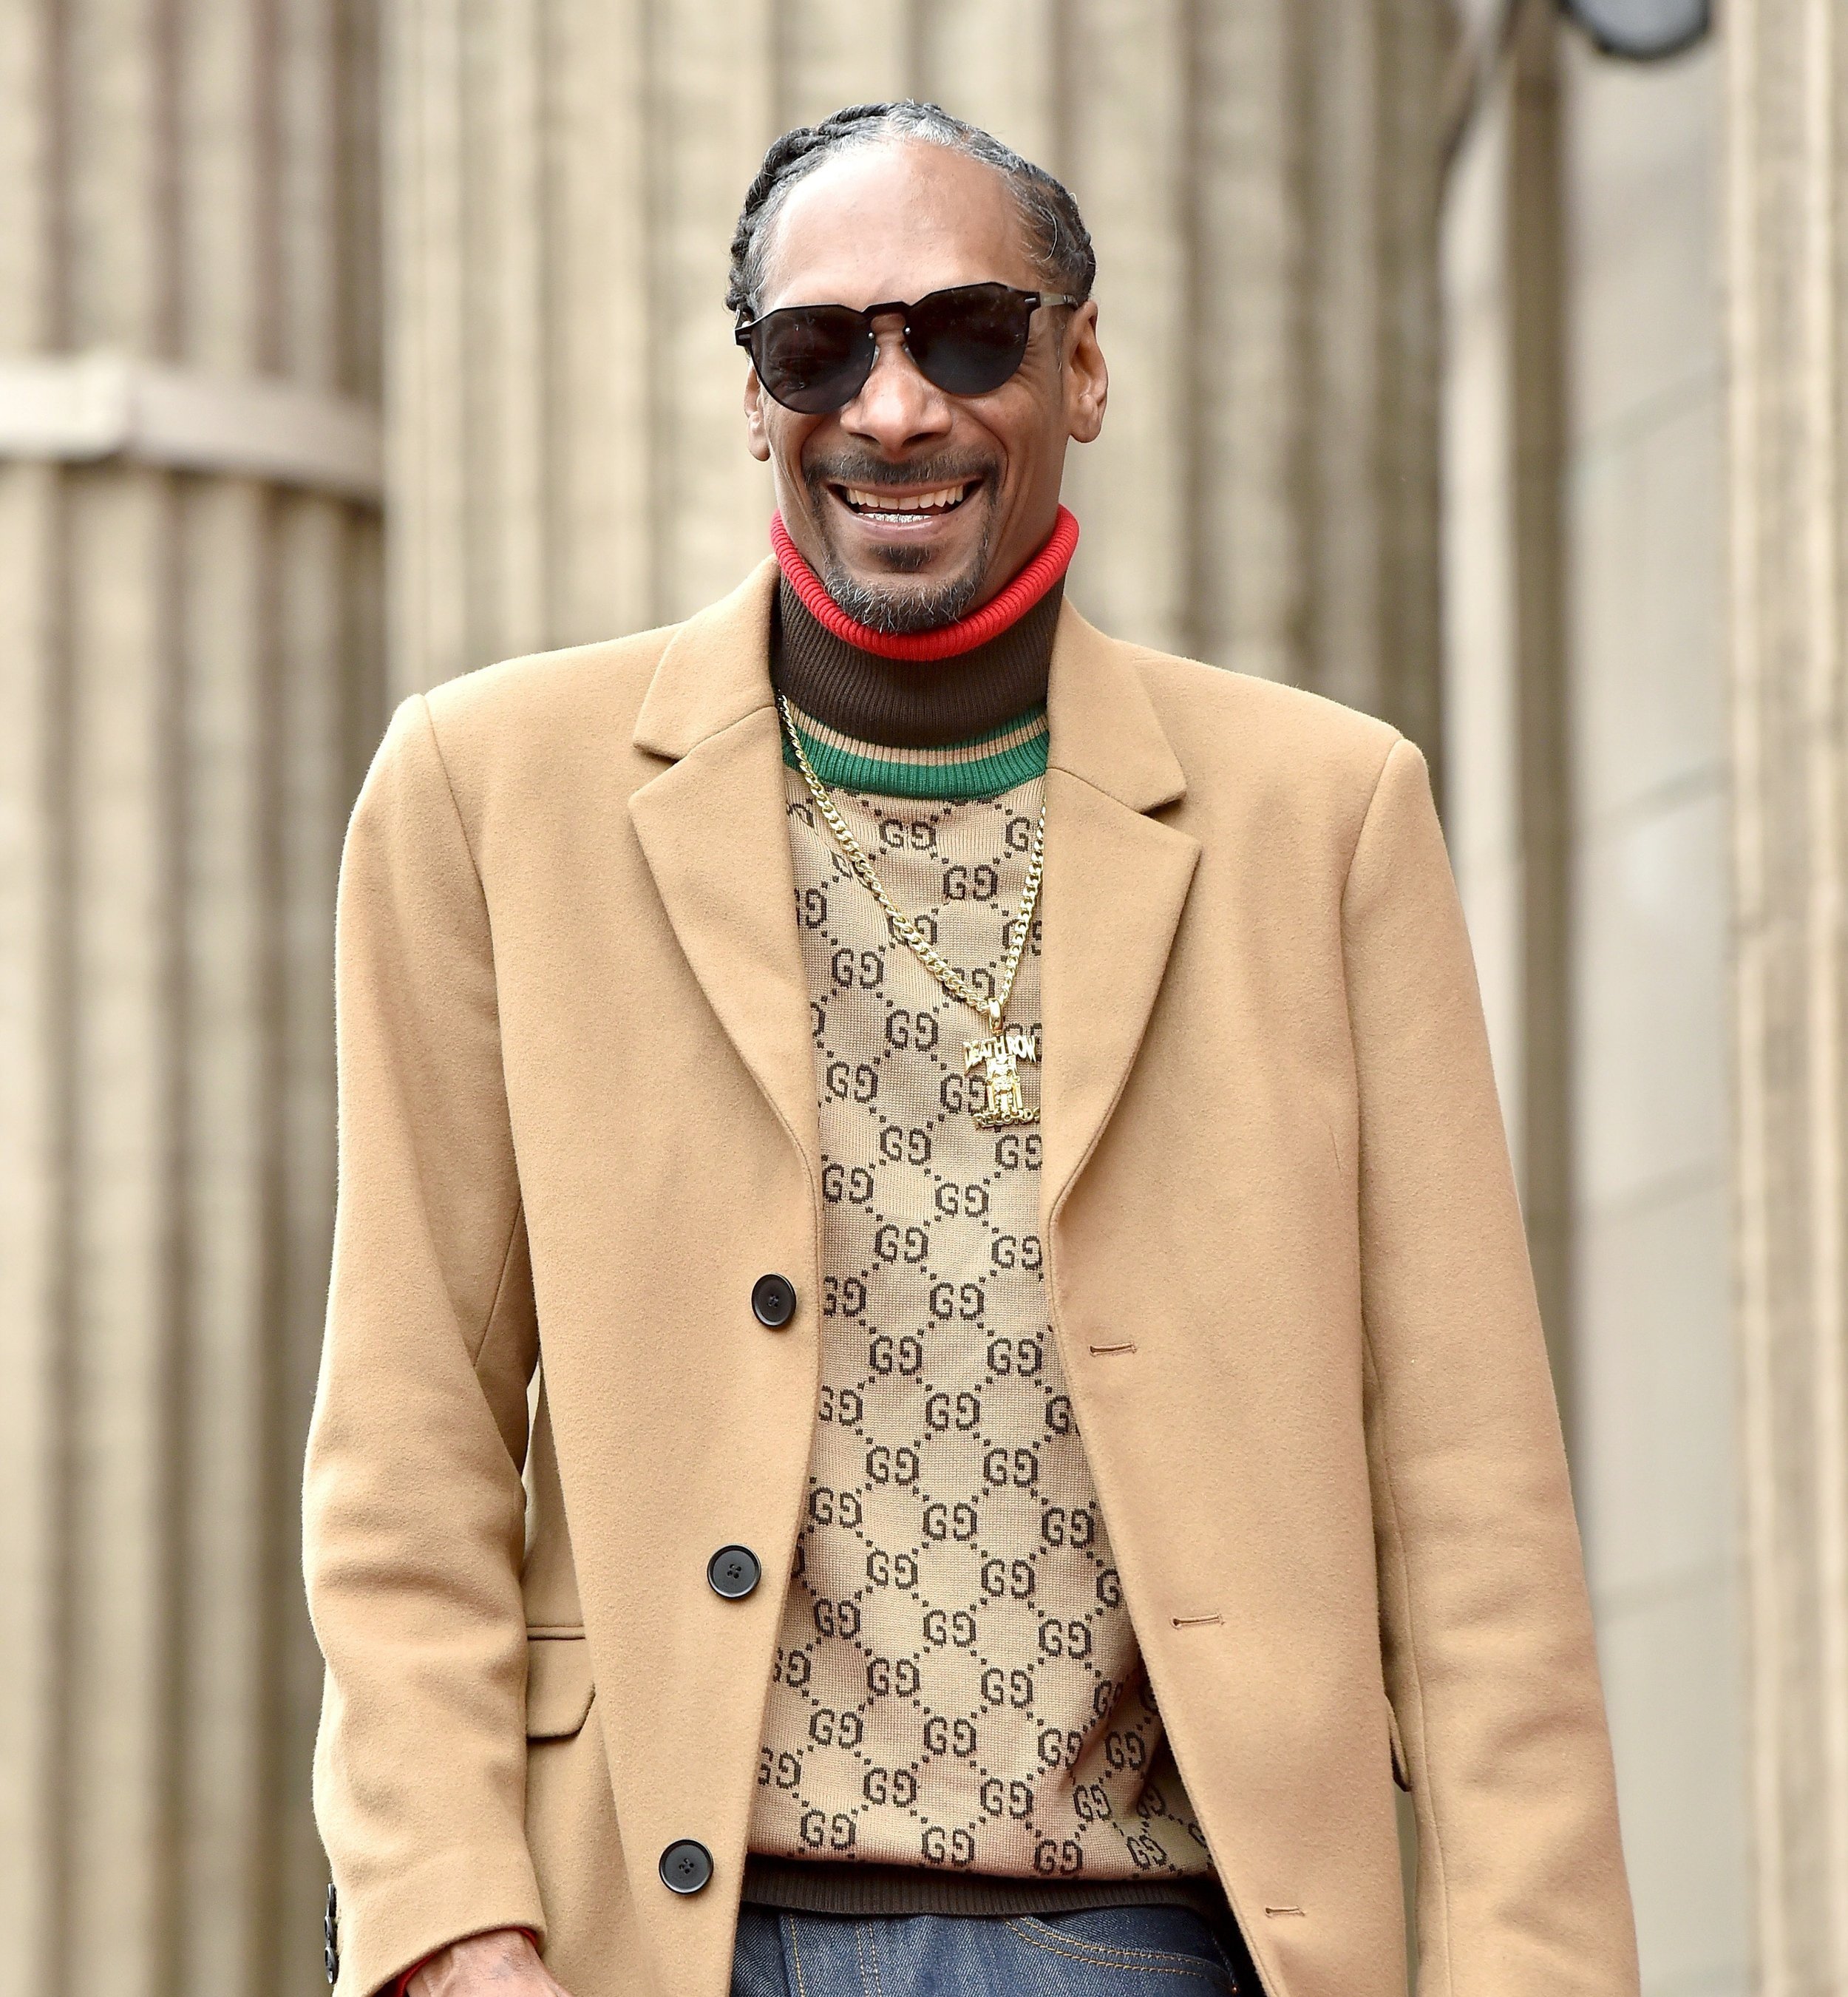 Snoop Dogg in Gucci.